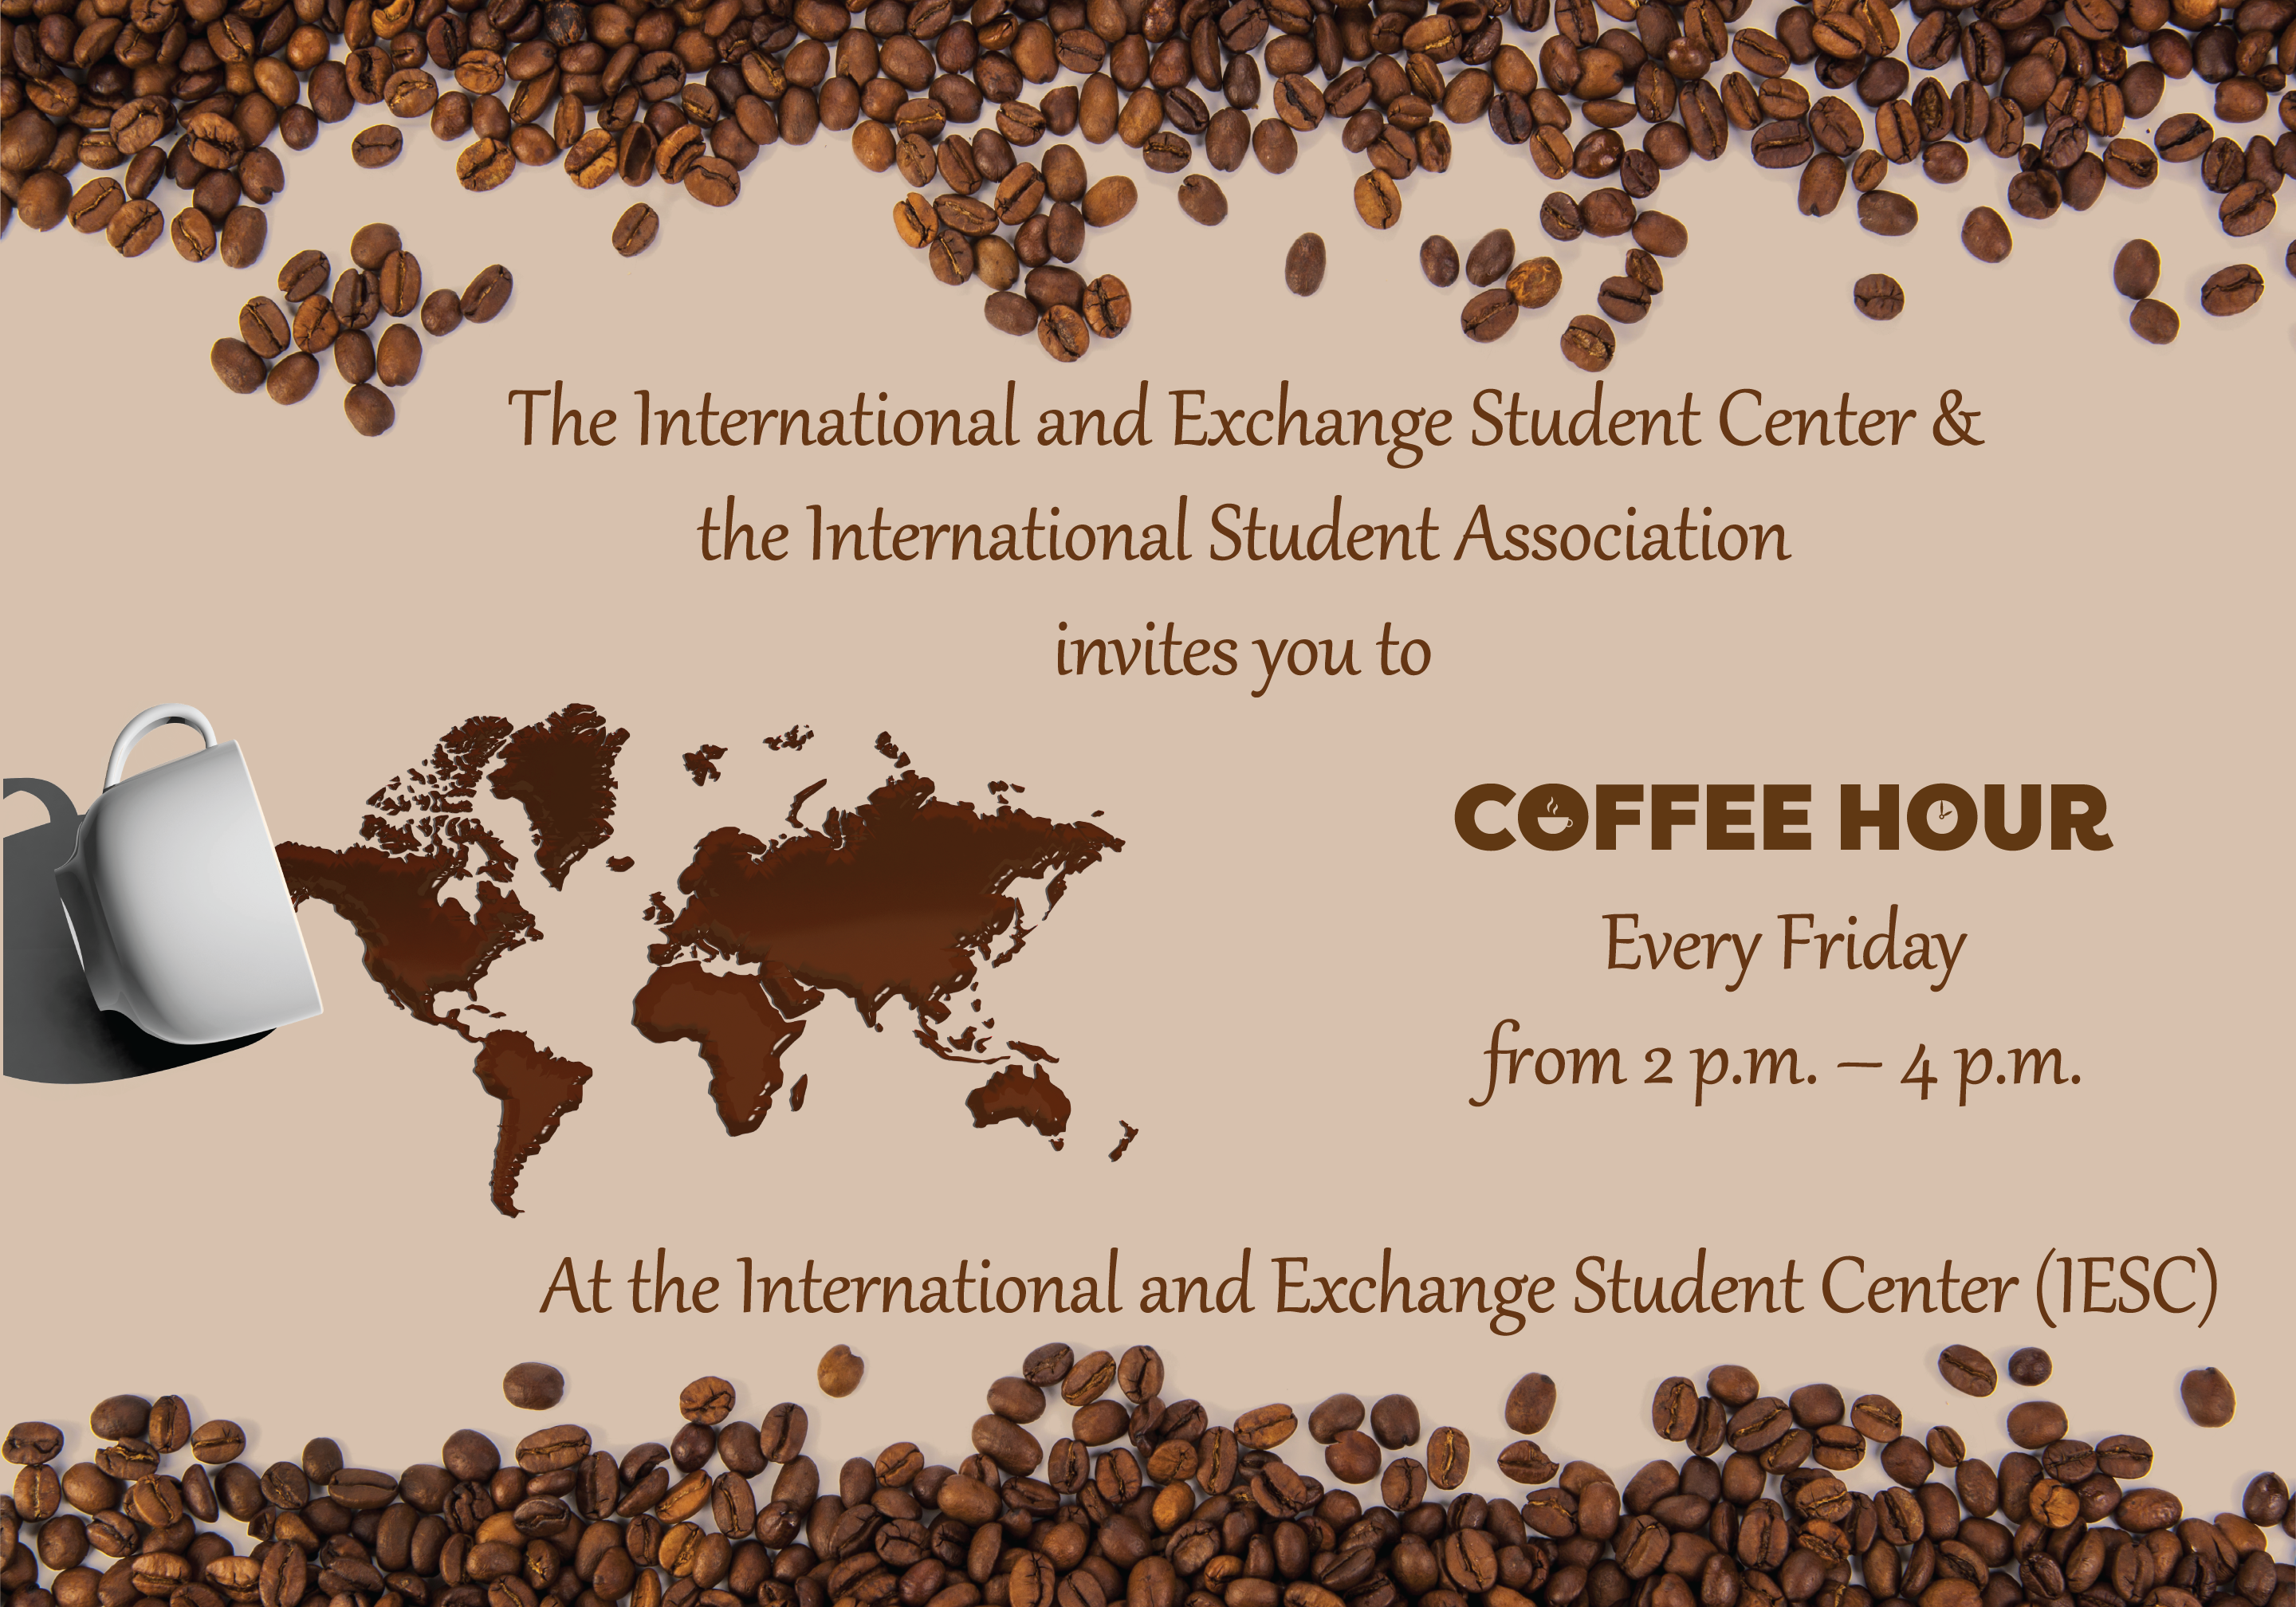 The IESC and the International Student Association invites you to Coffee Hour: Ever Friday from 2 p.m. to 4 p.m. at the IESC